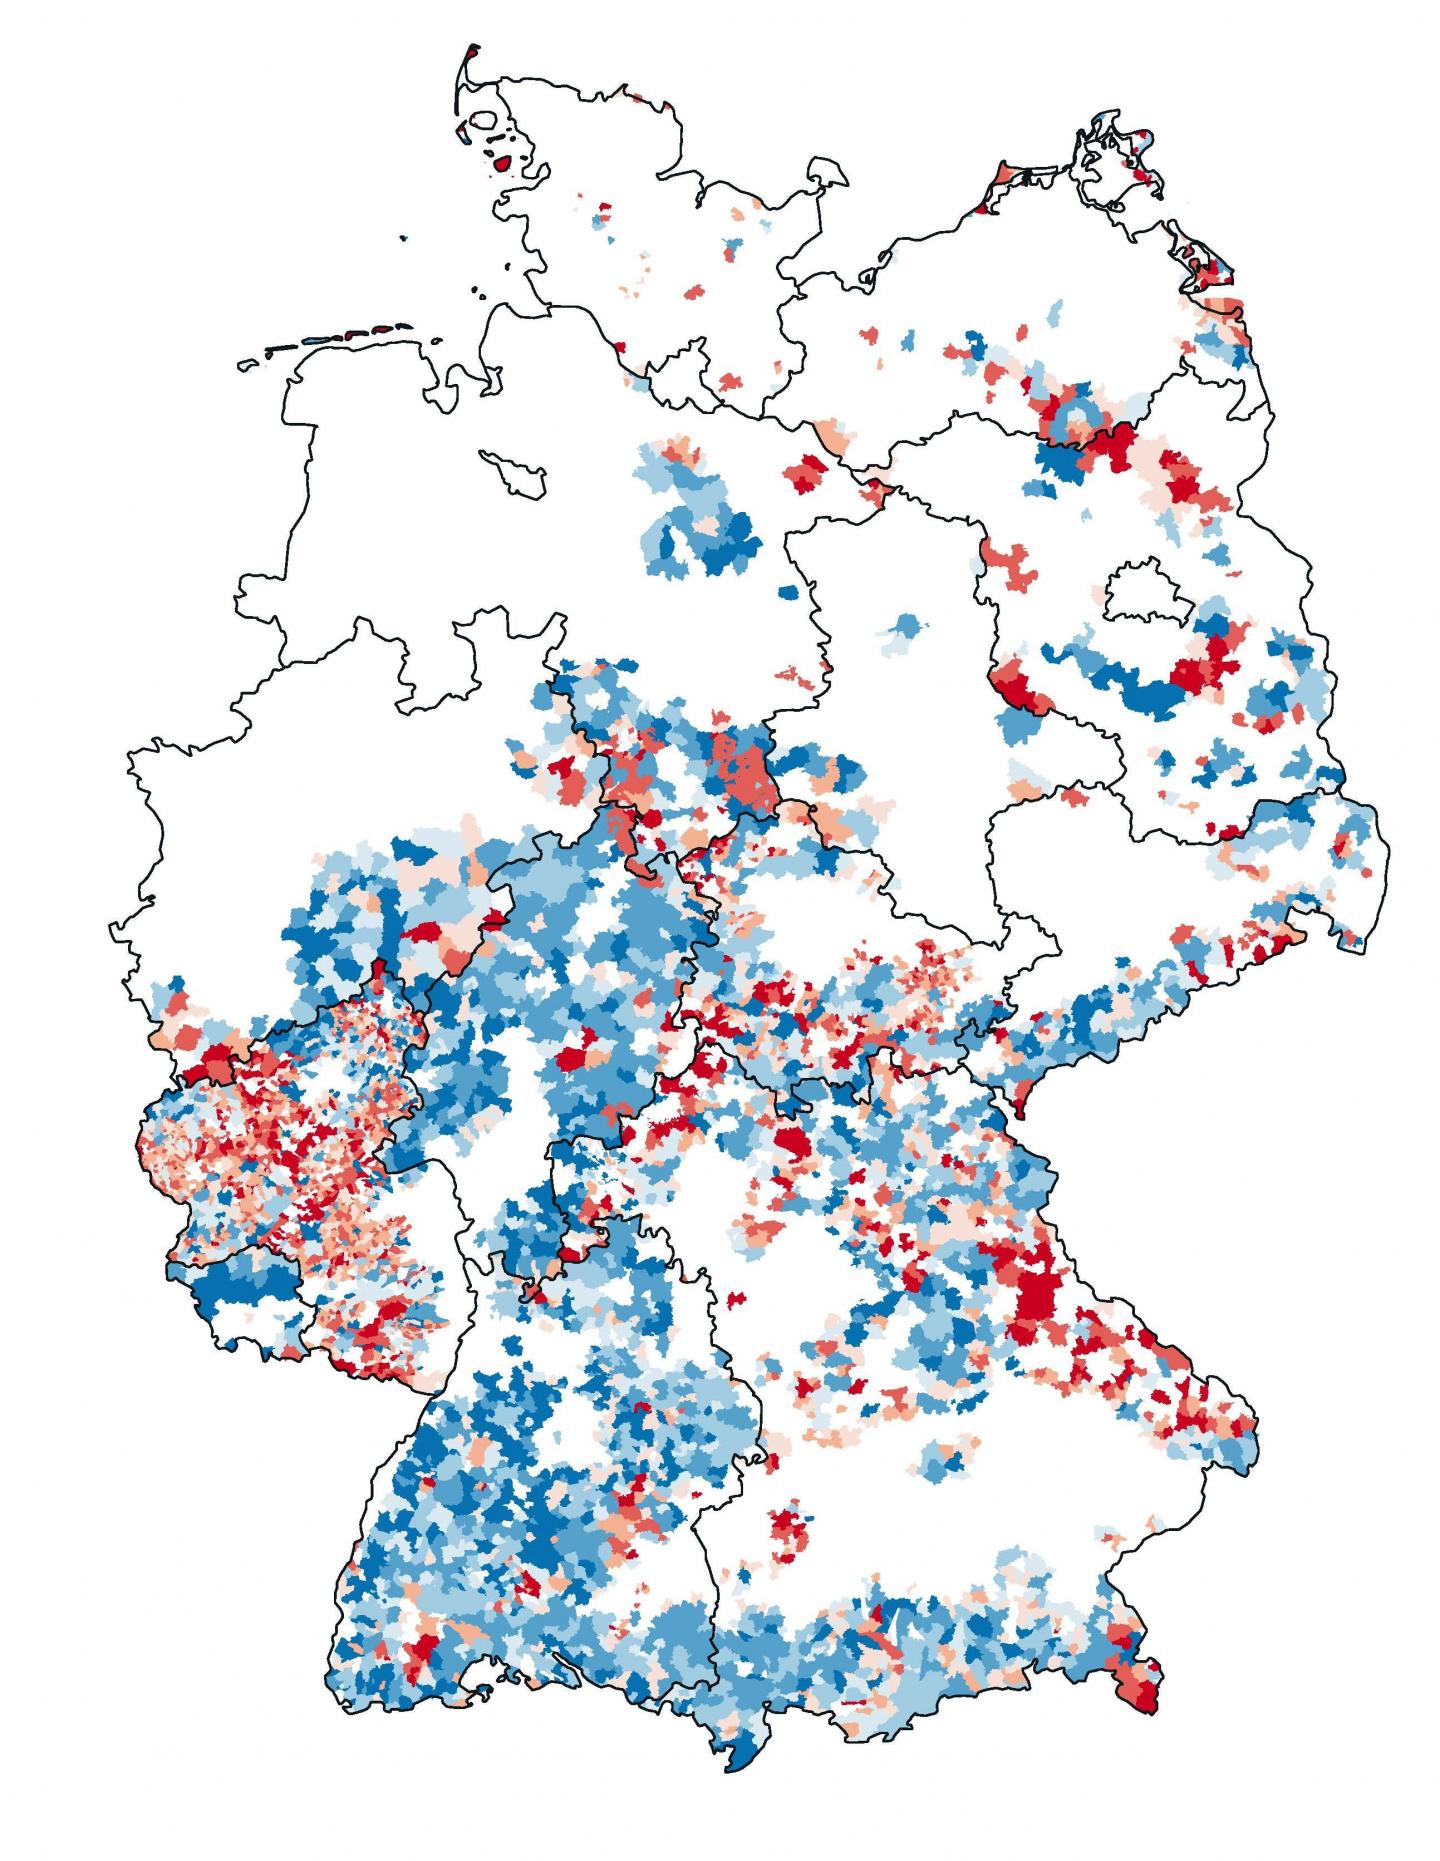 This map shows beautiful landscapes in Germany and the costs of a stop of wind power expansion.